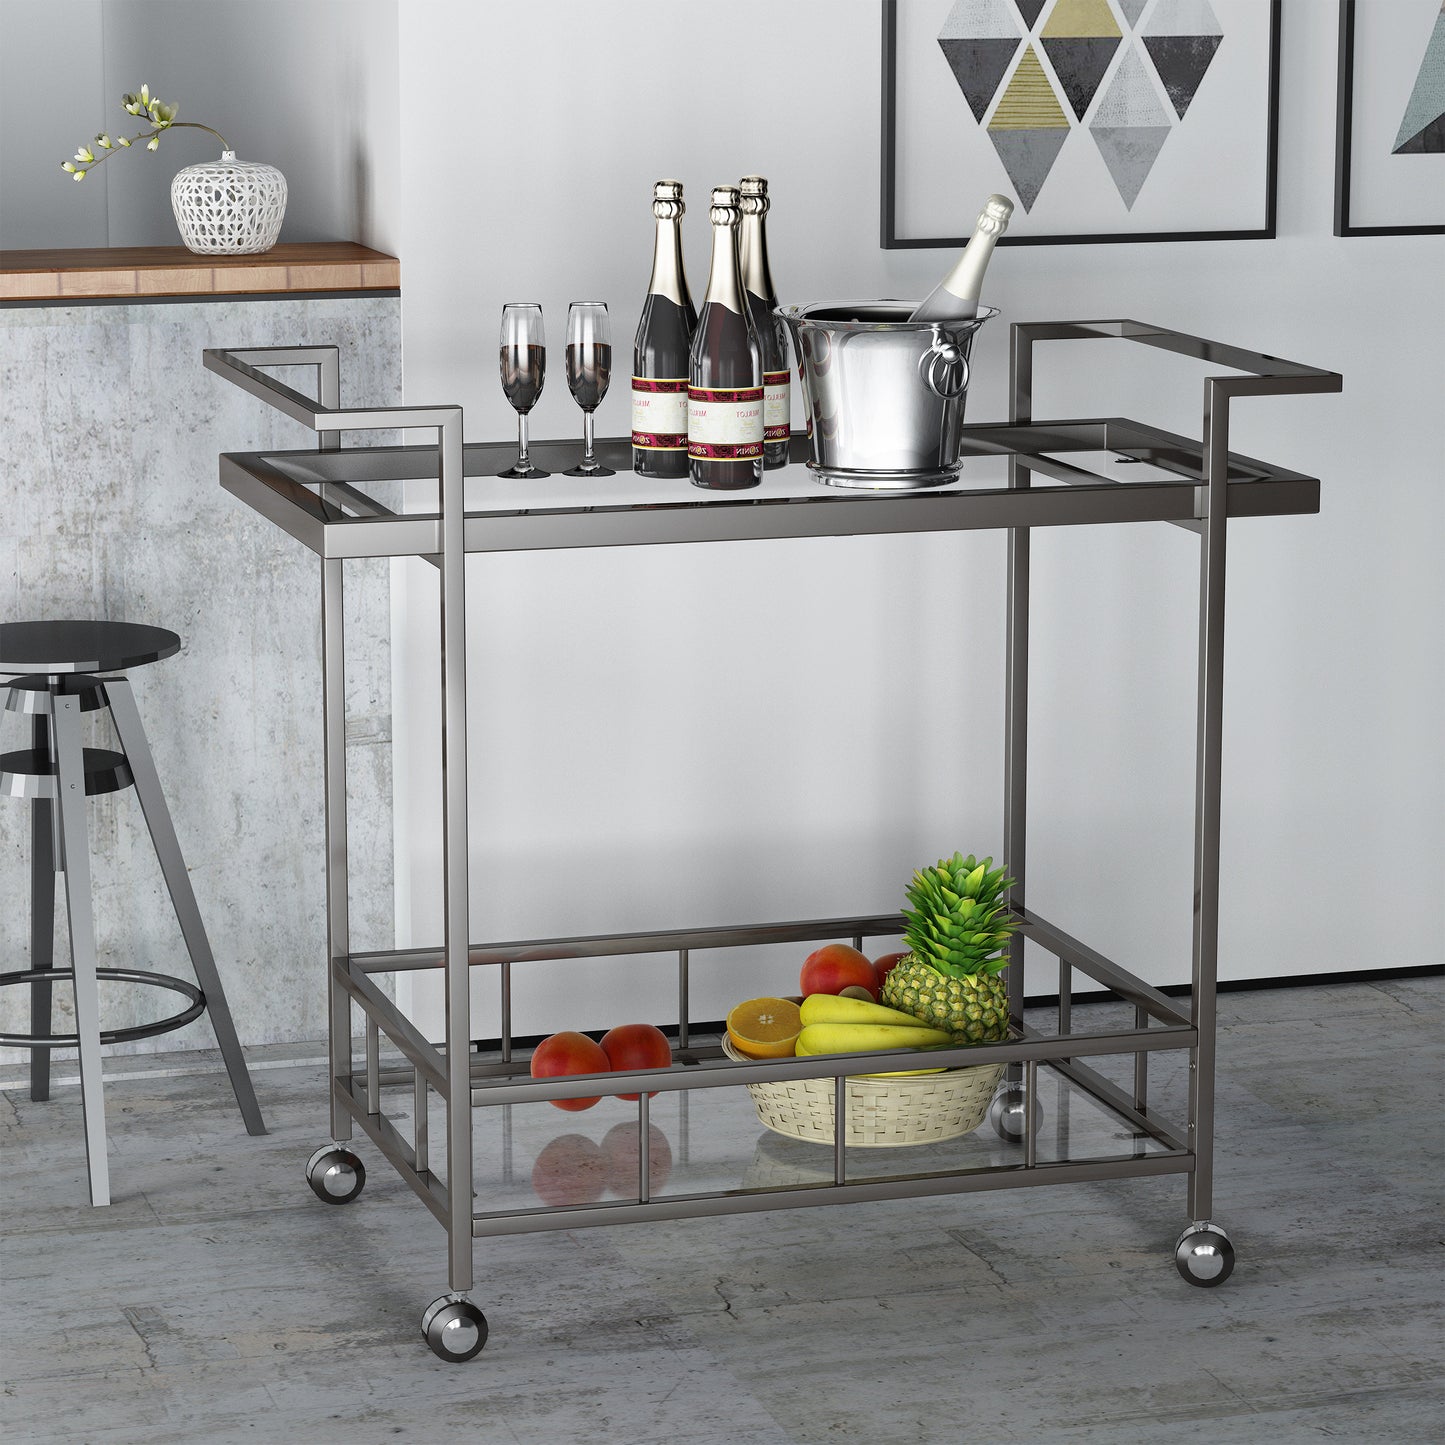 Brose Indoor Industrial Black Iron Bar Cart with Tempered Glass Shelves